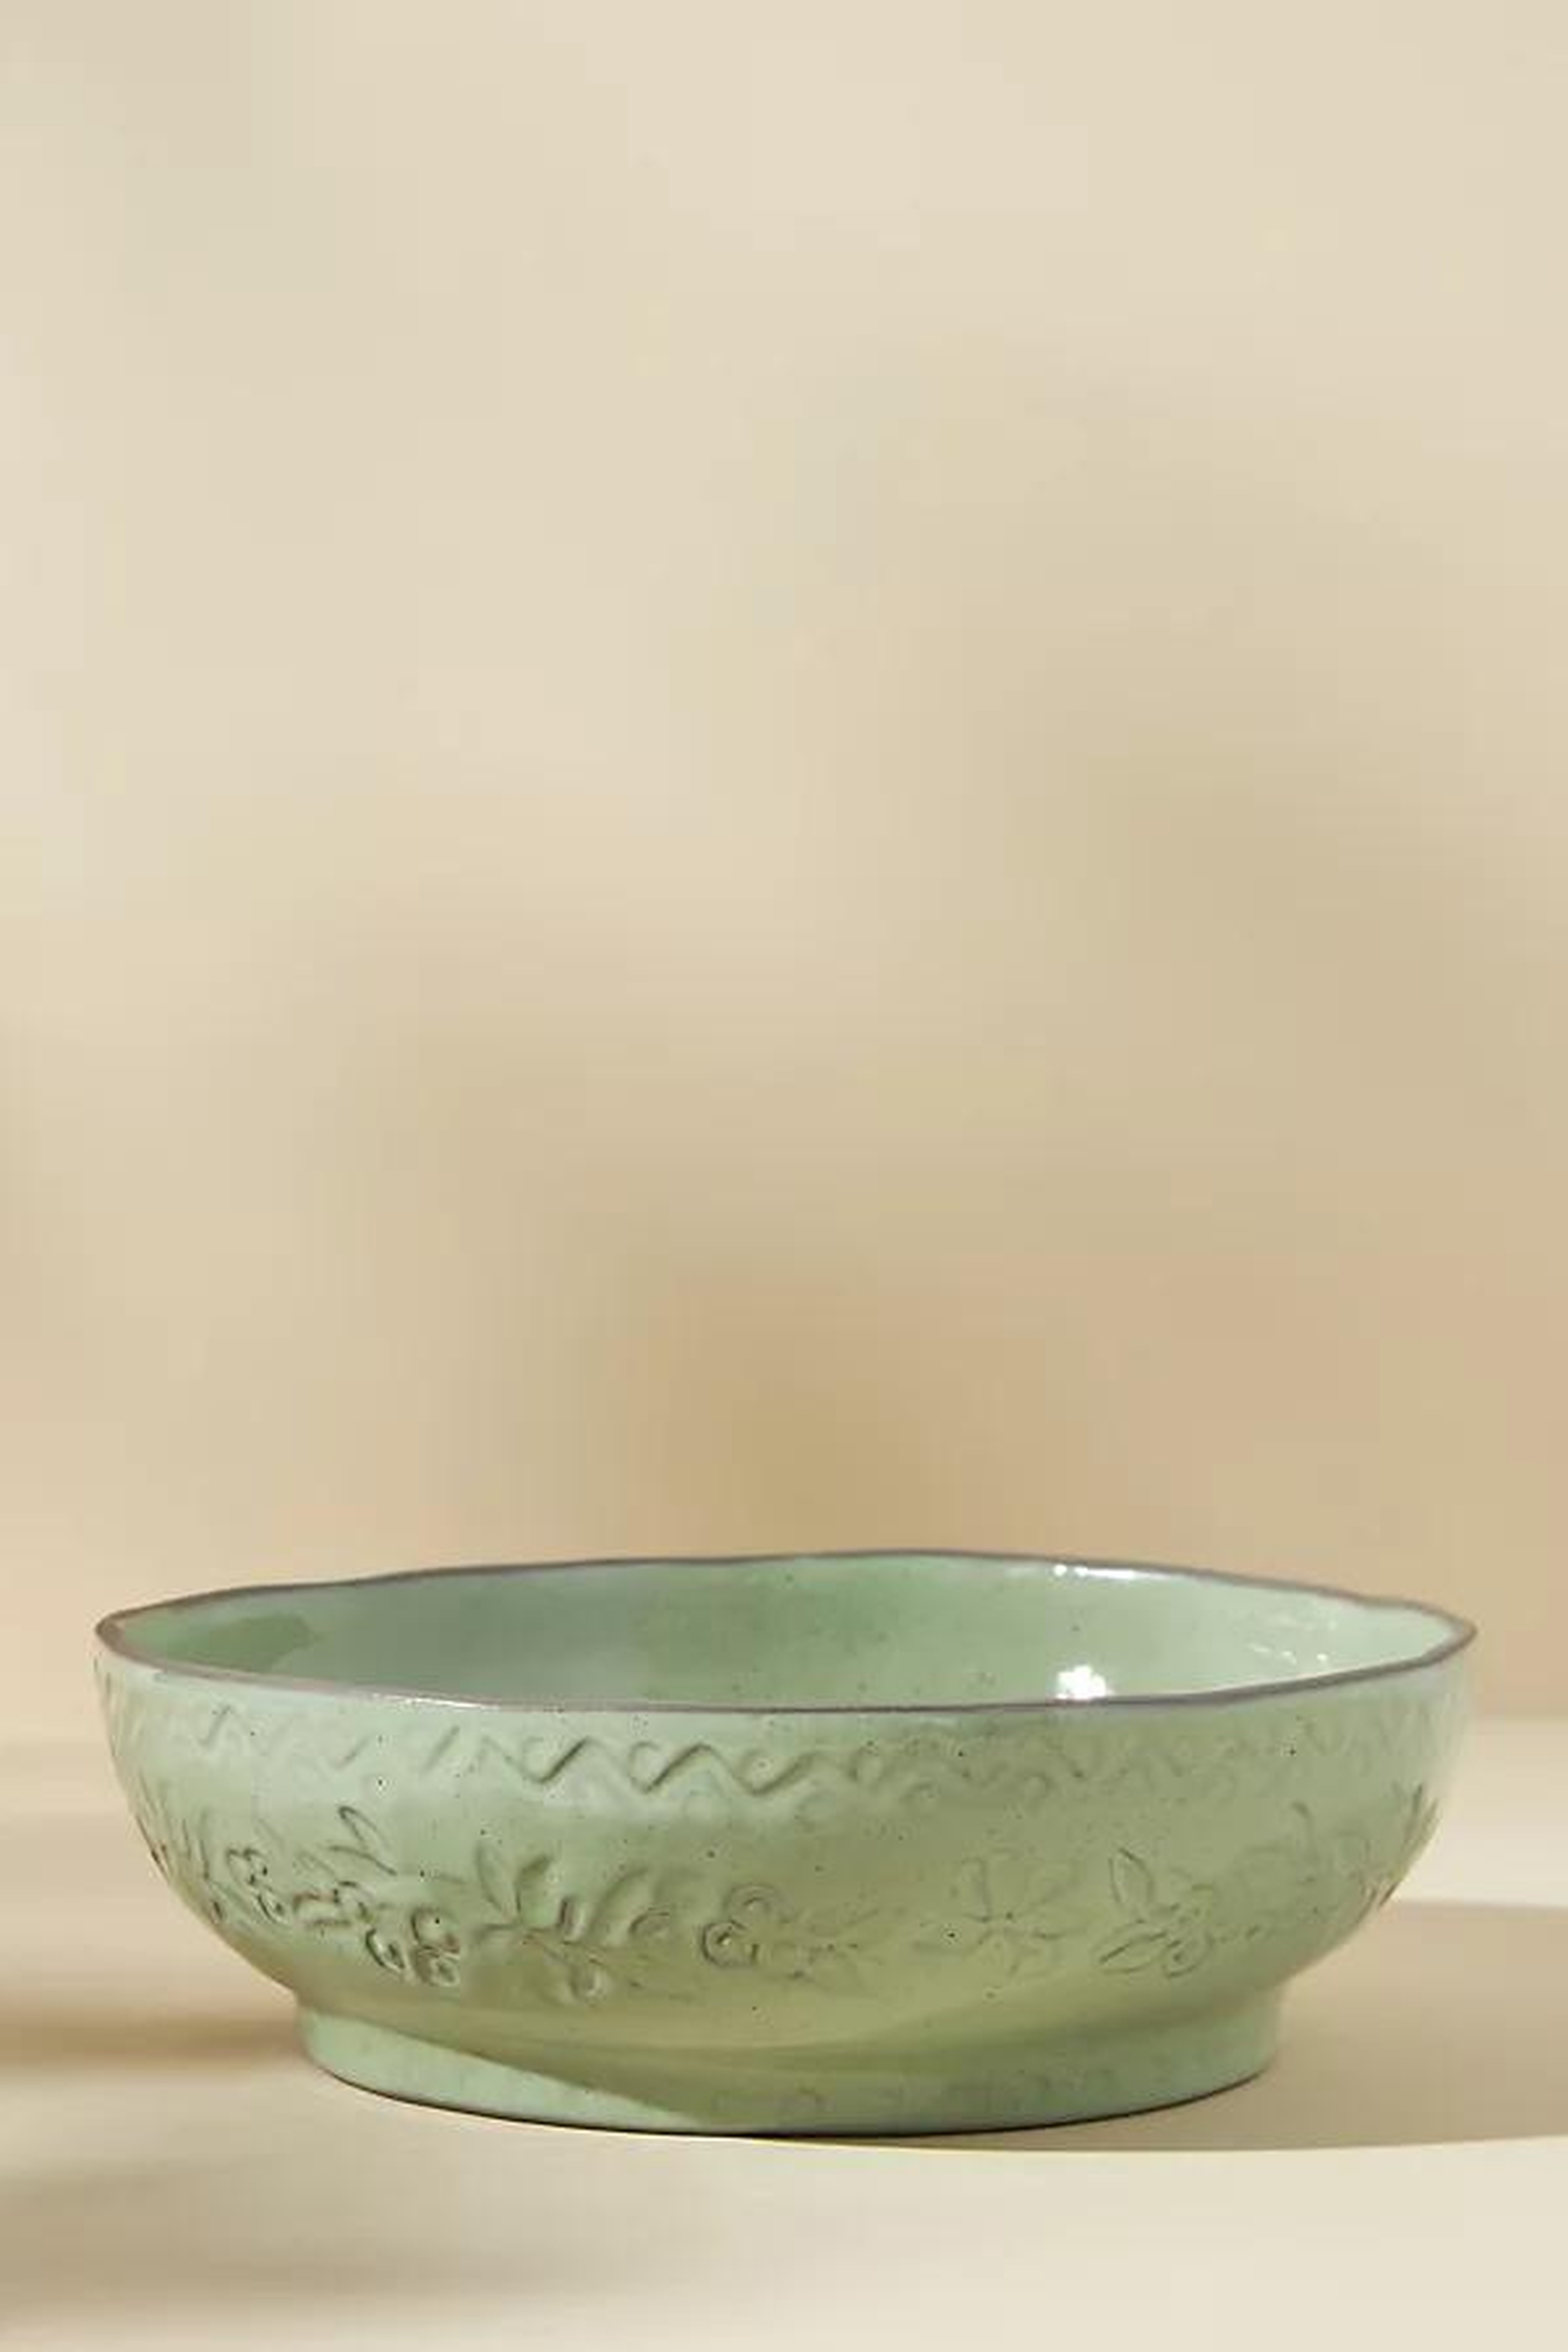 Paulie Bowl By Anthropologie in Mint Size BOWL - Anthropologie